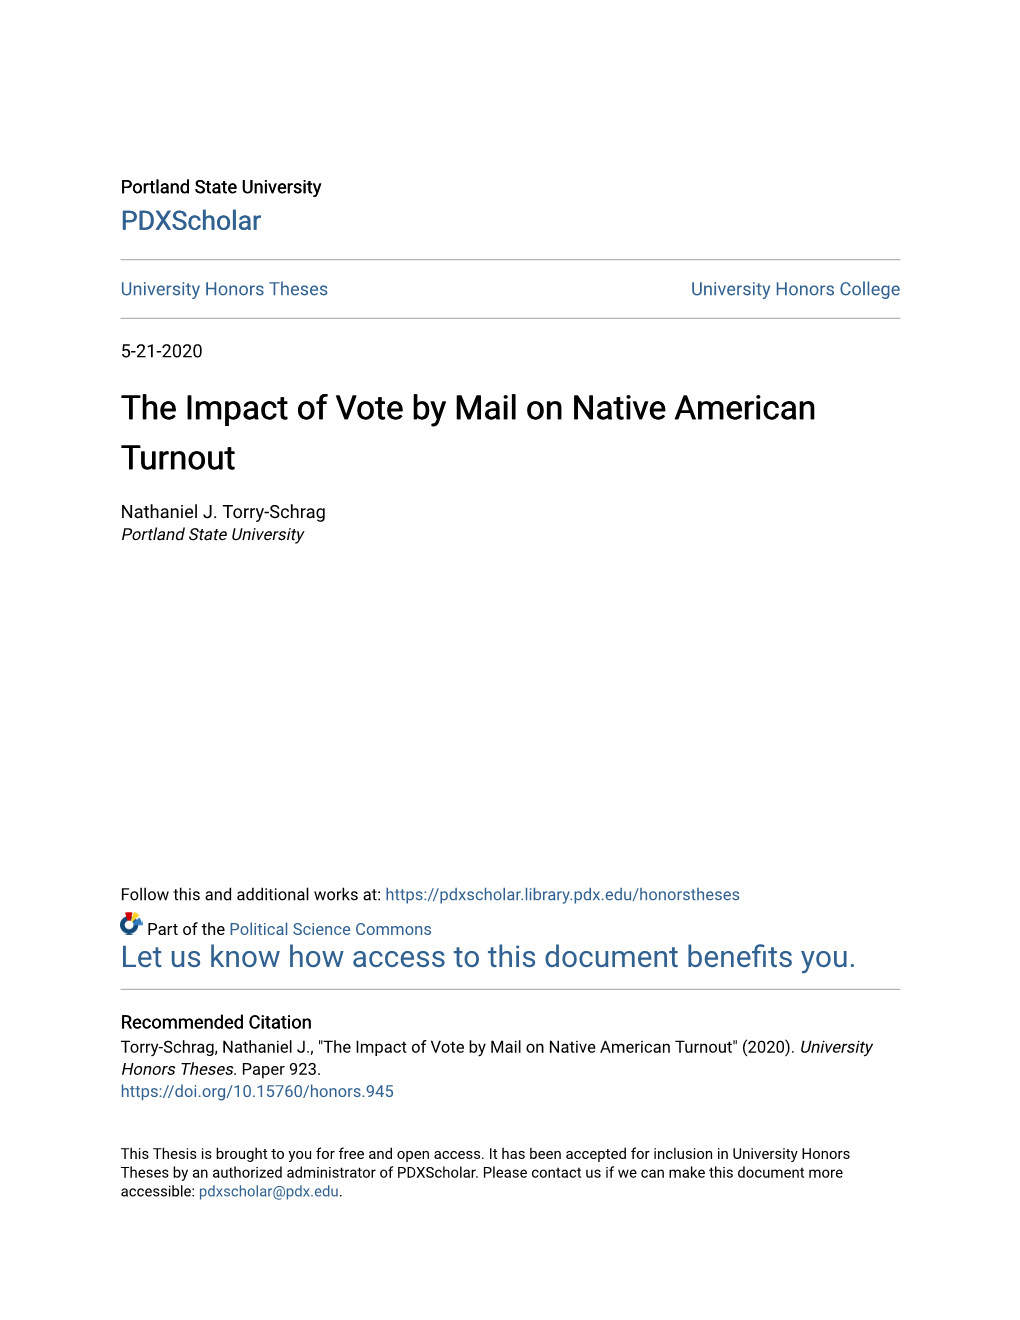 The Impact of Vote by Mail on Native American Turnout